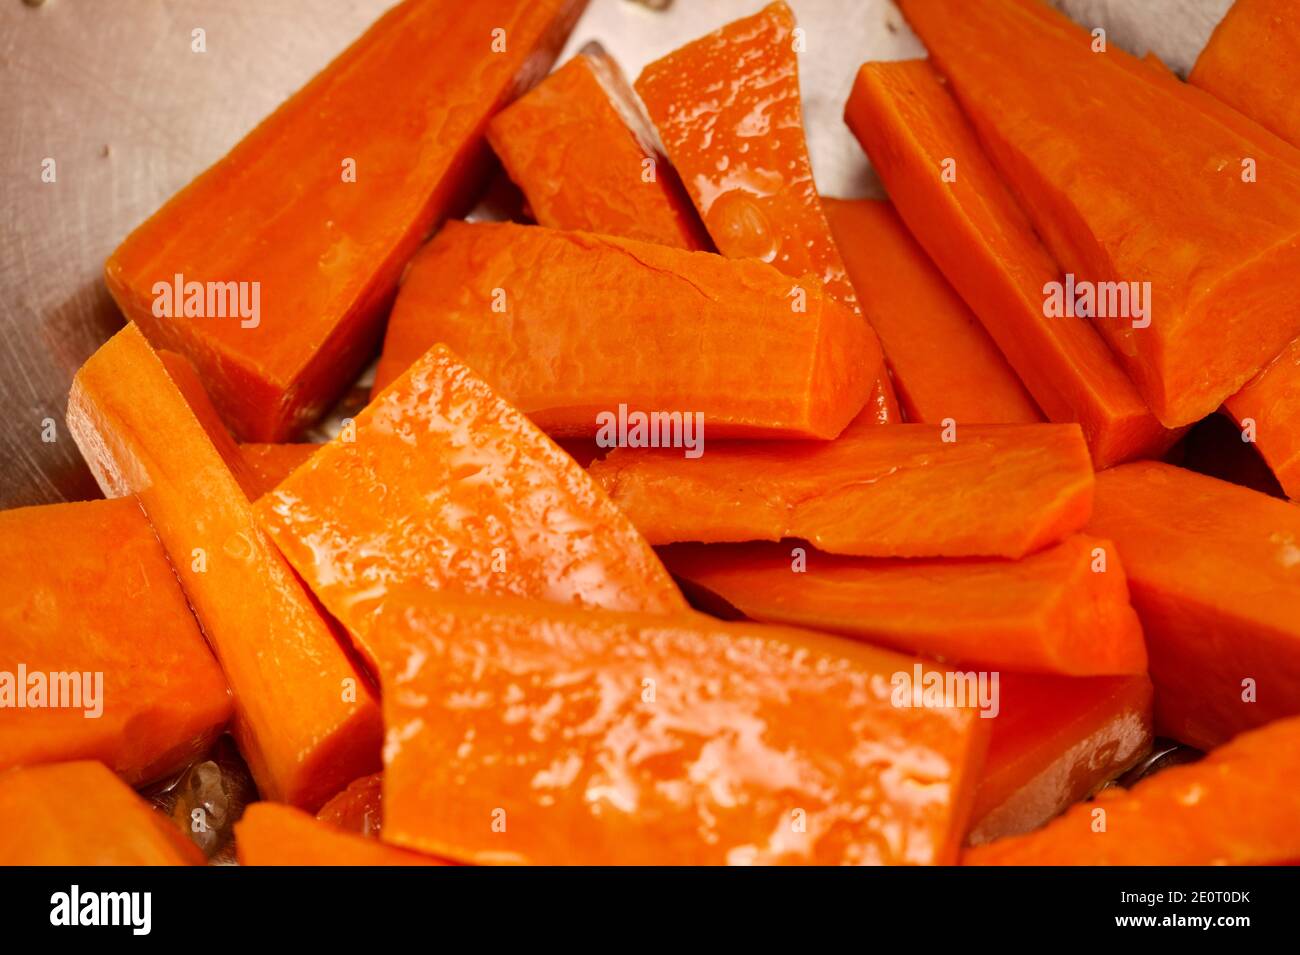 Cut sweet potato, oiled and salted, prepared for roasting Stock Photo